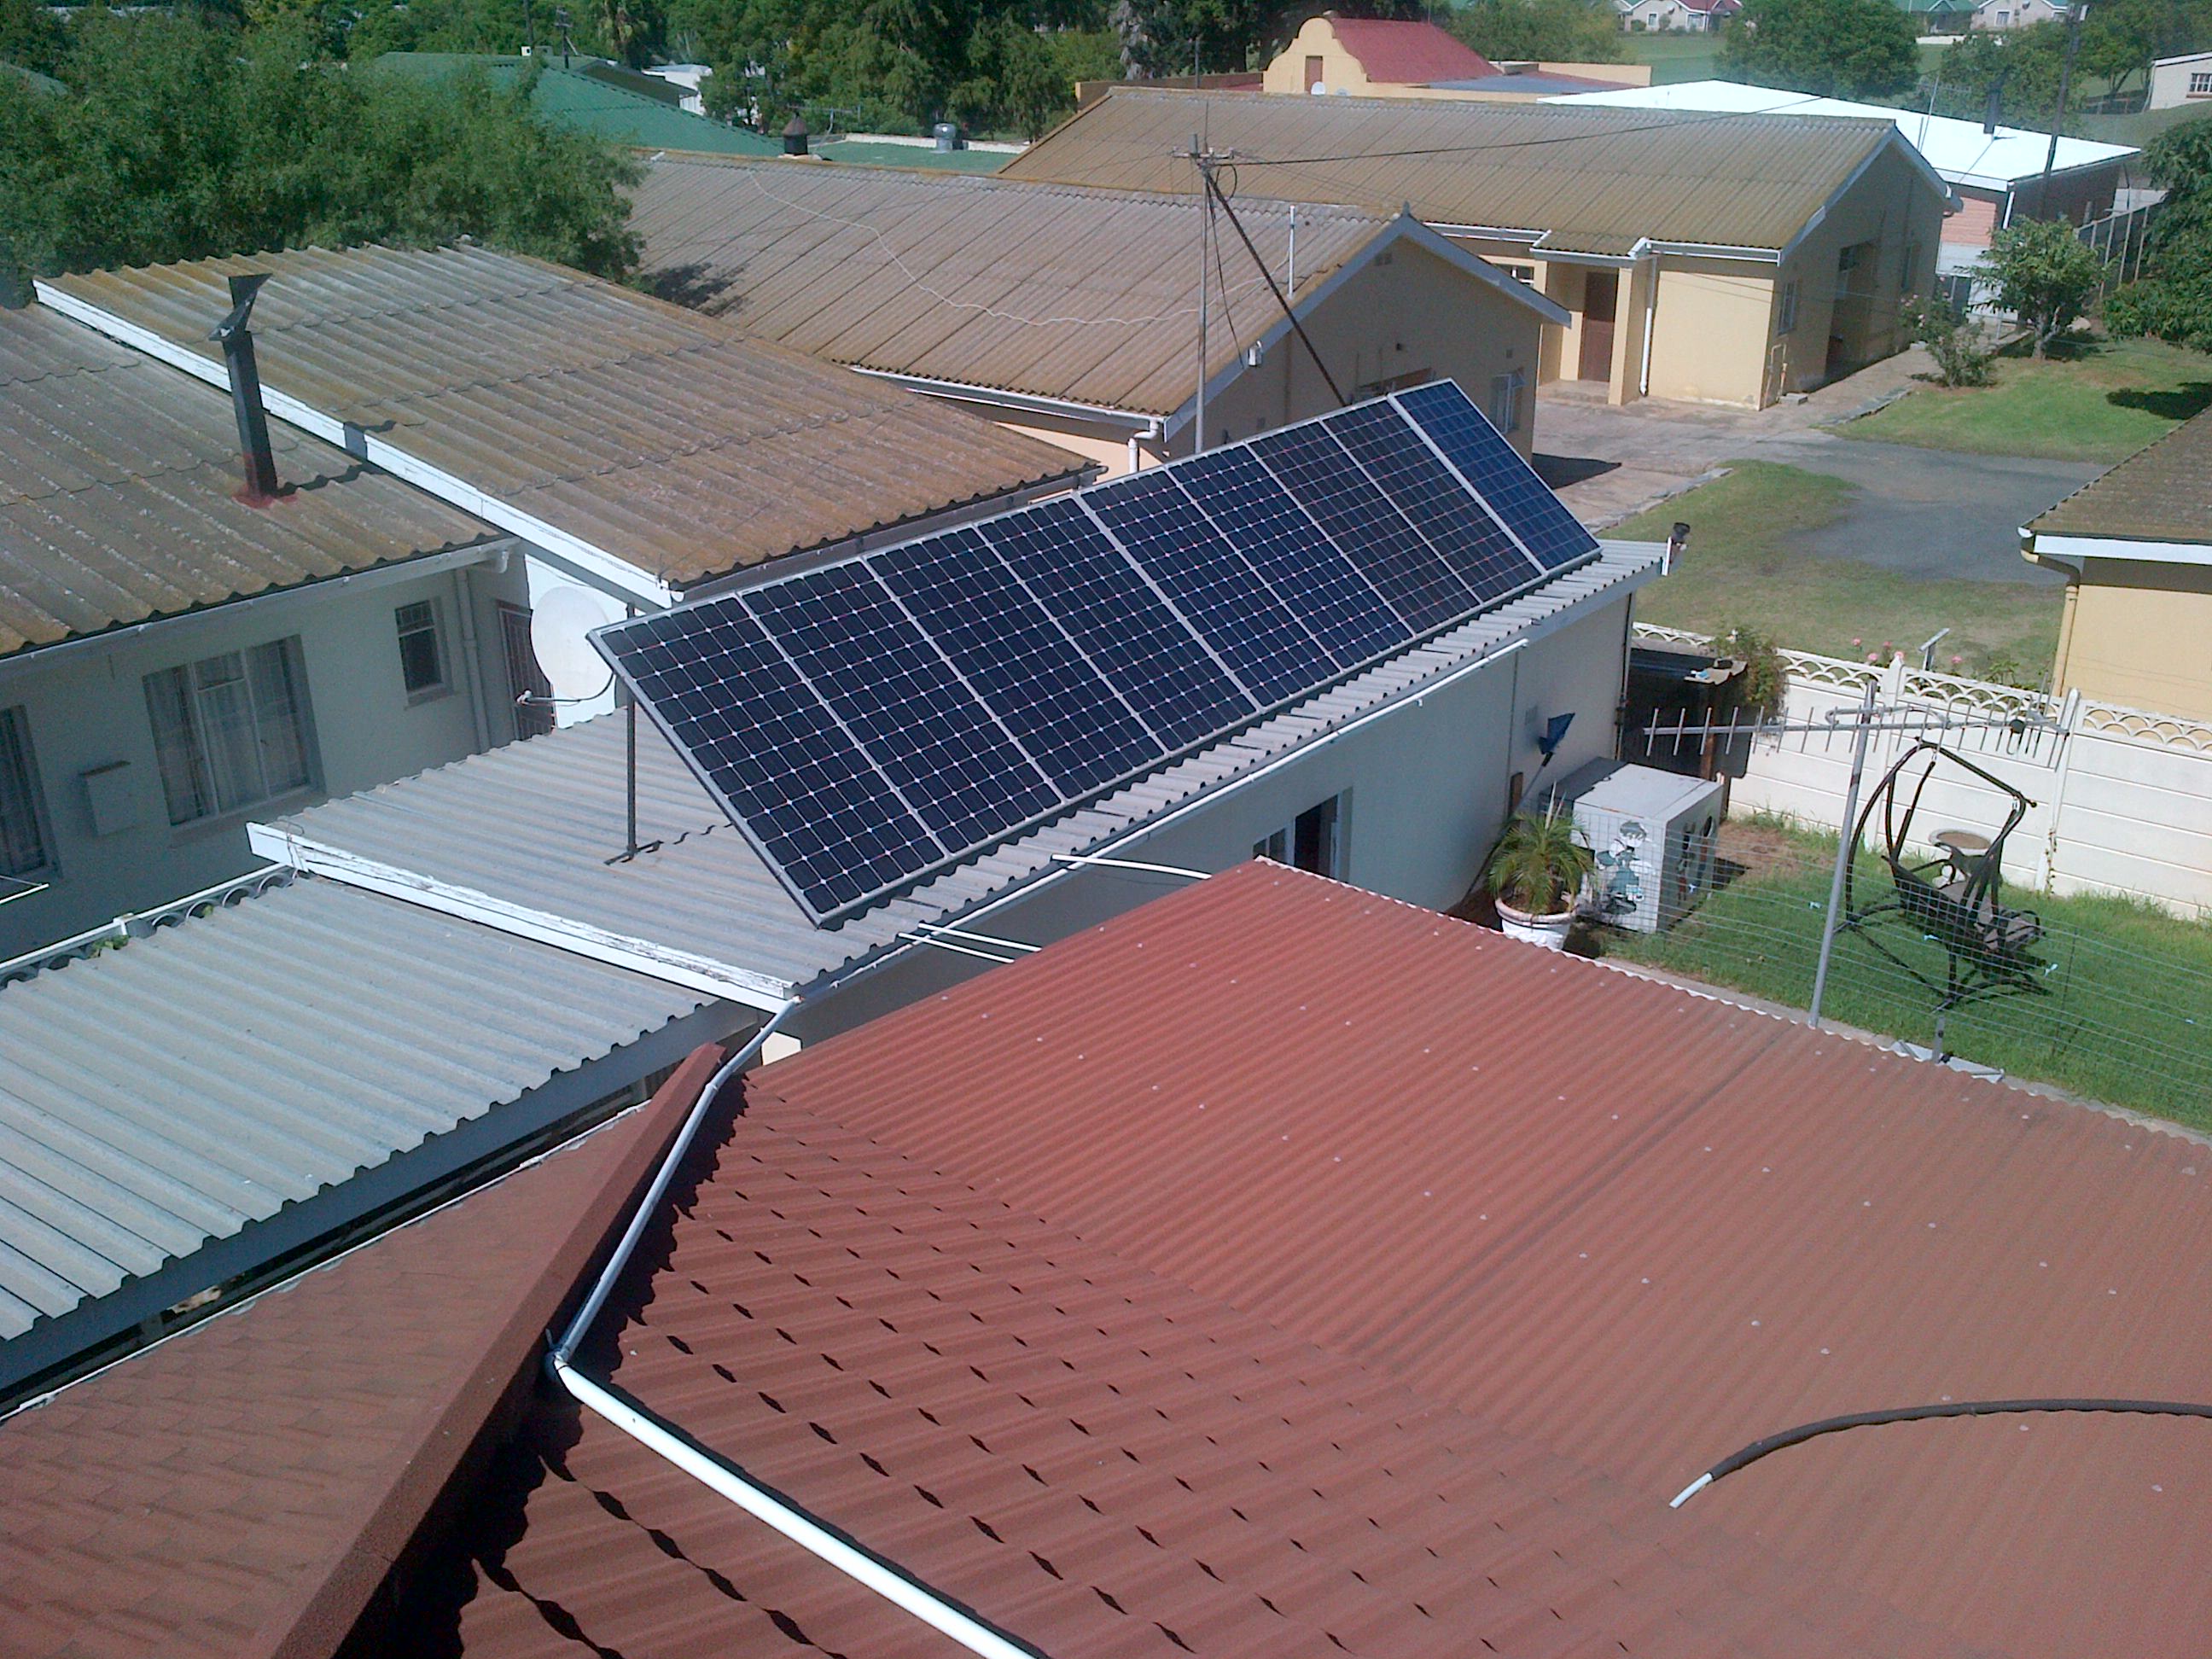 Key practical applications for using solar power at home!